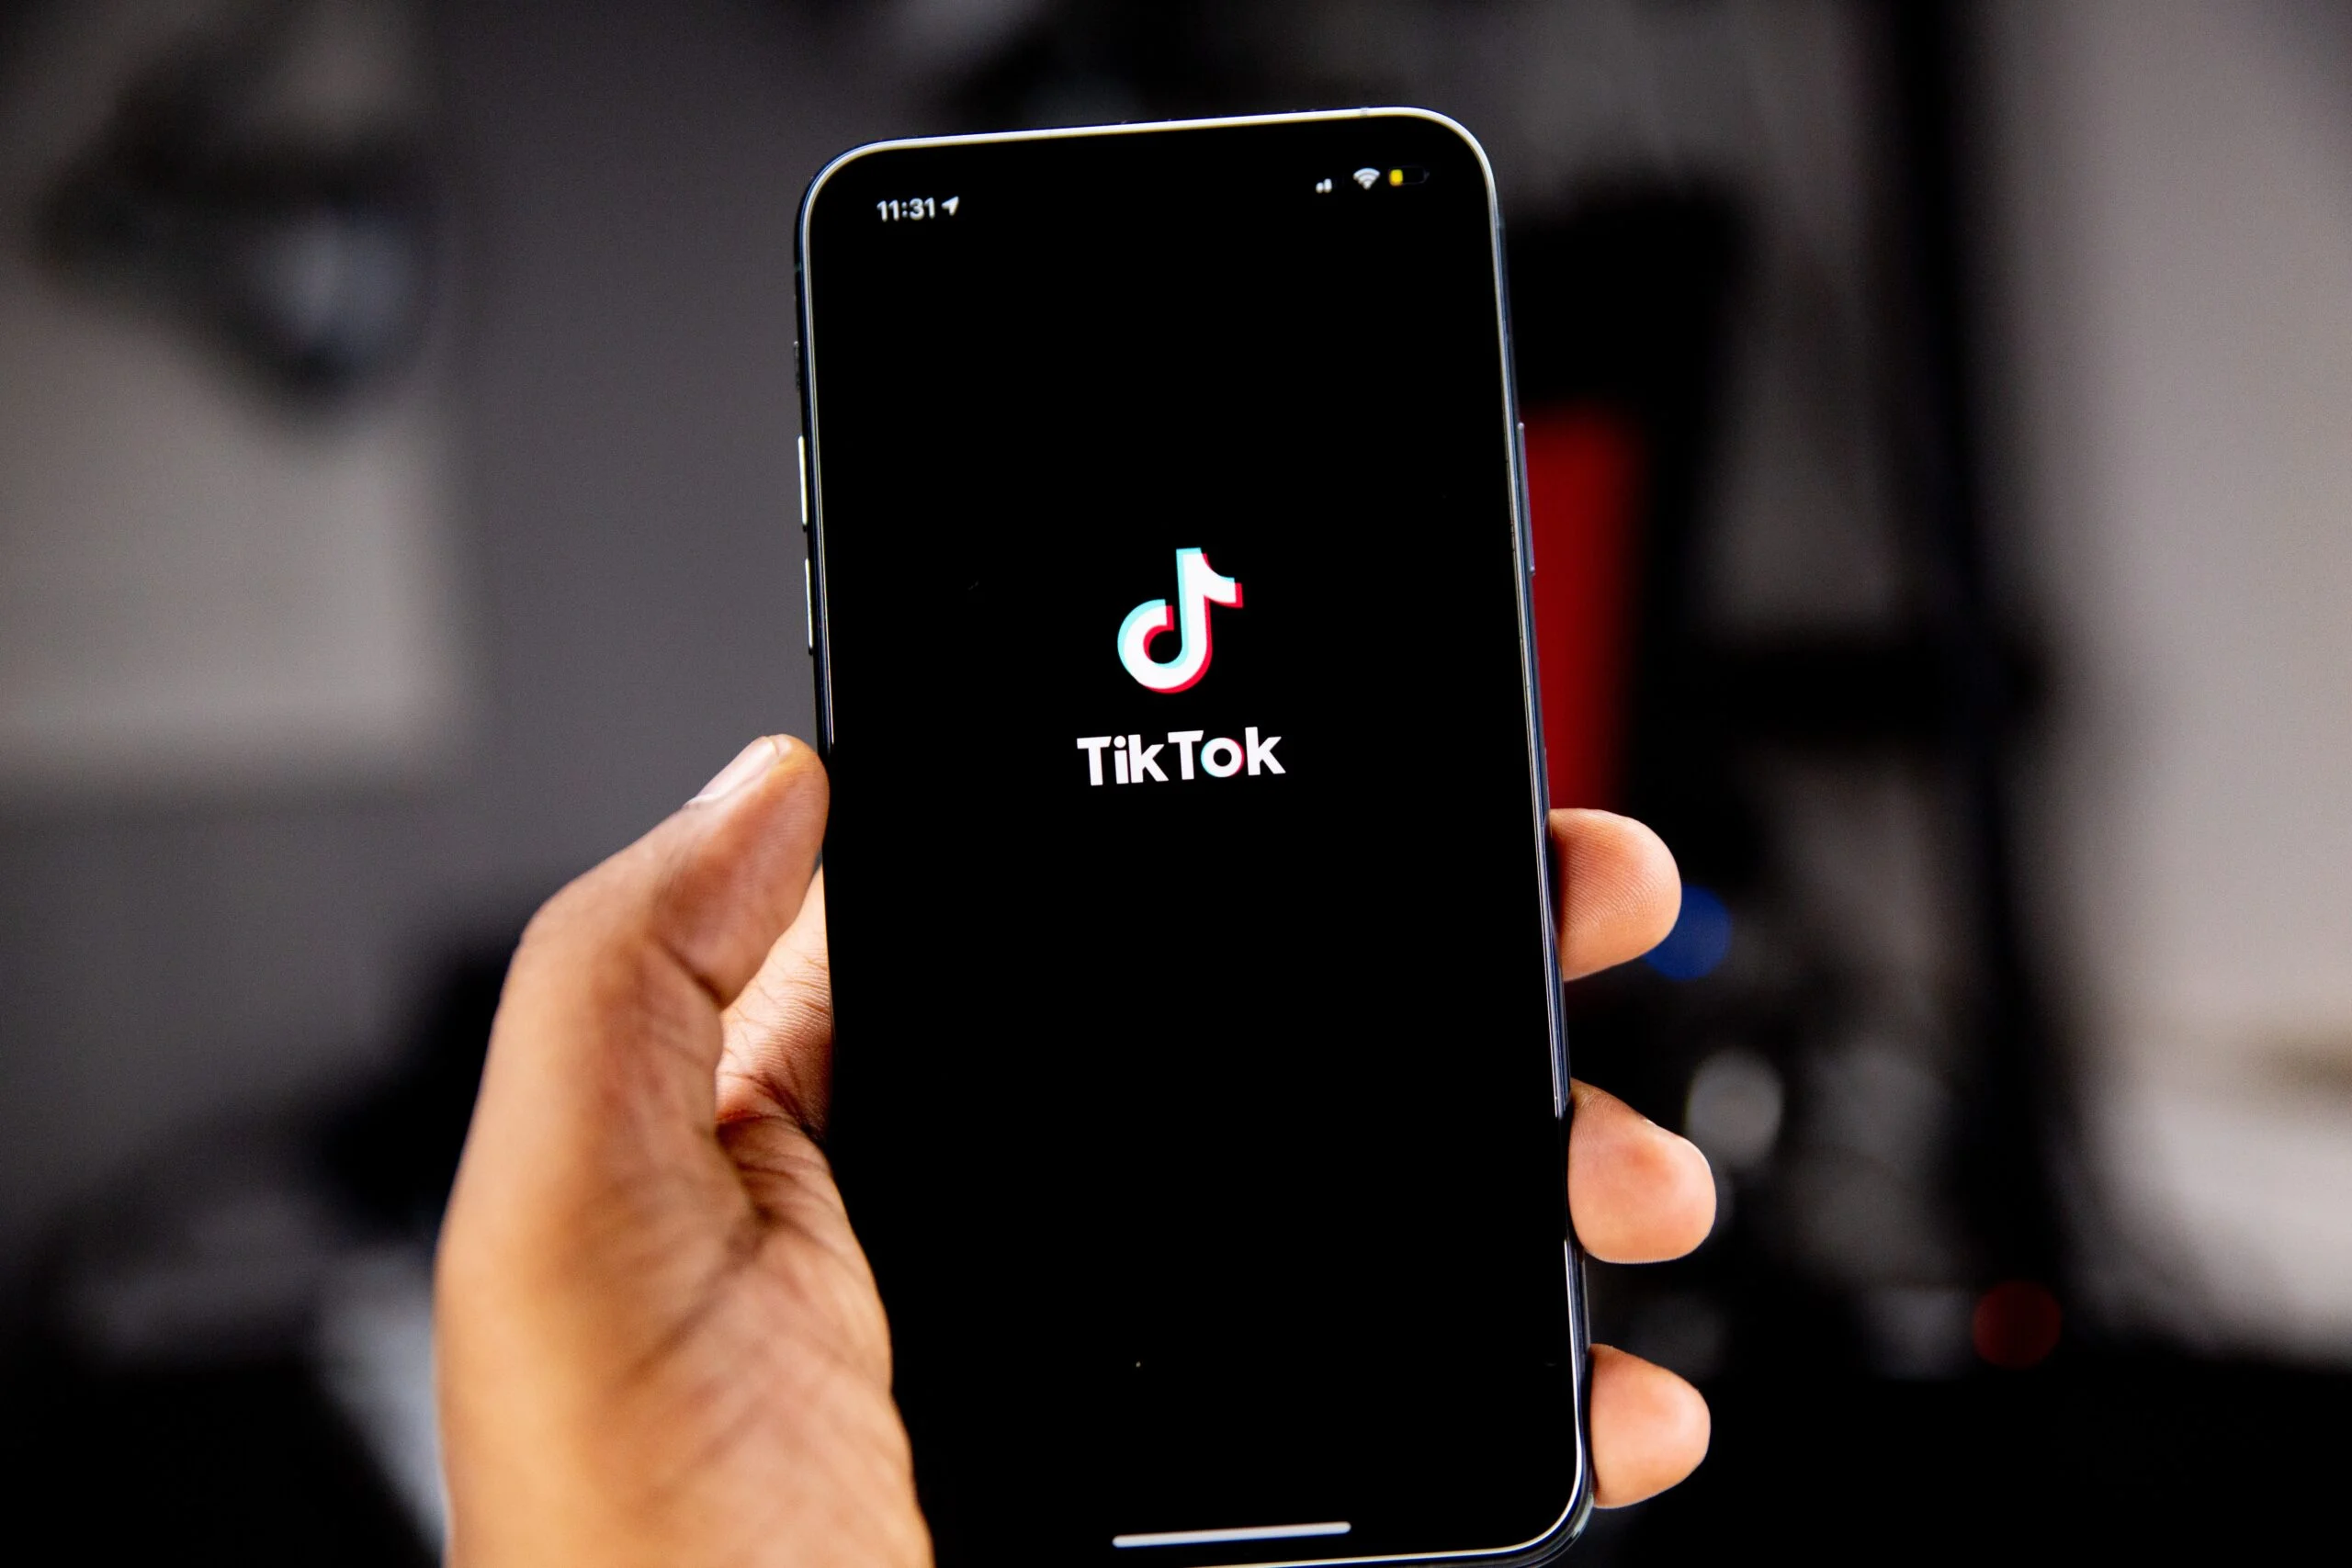 What Does Two Fingers-Touching Emoji Mean on TikTok?